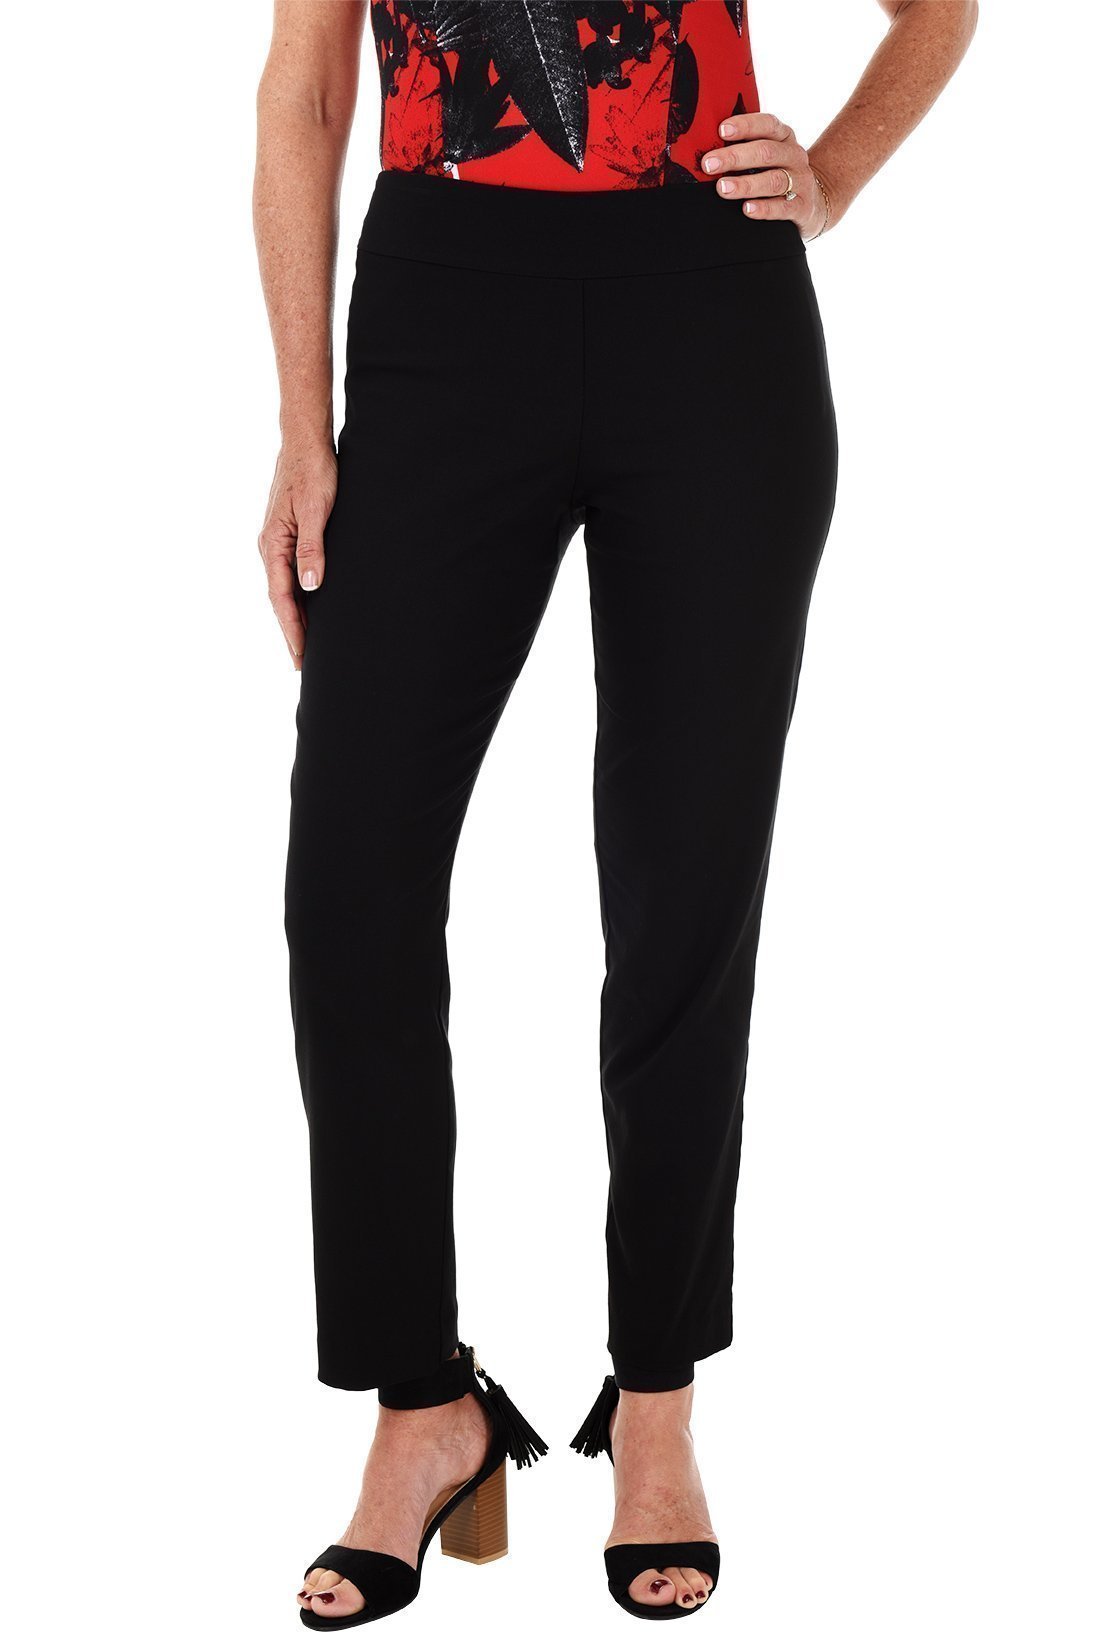 Krazy Larry Pull-On Women's Ankle Pant | Anthony's Florida